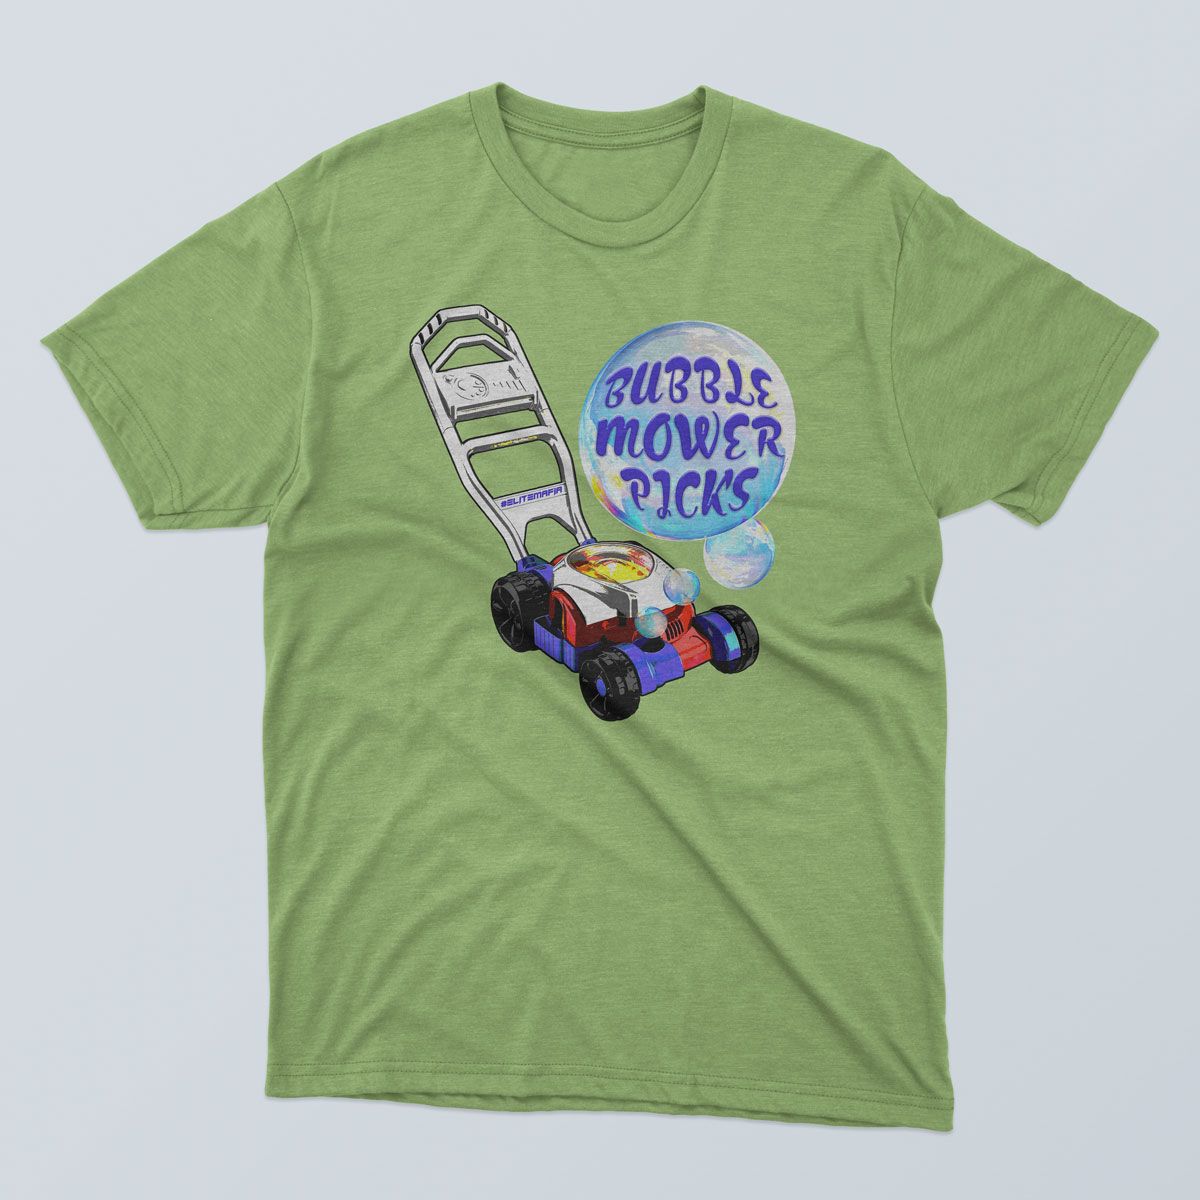 a green t-shirt with a lawn mower on it that says bubble mower picks